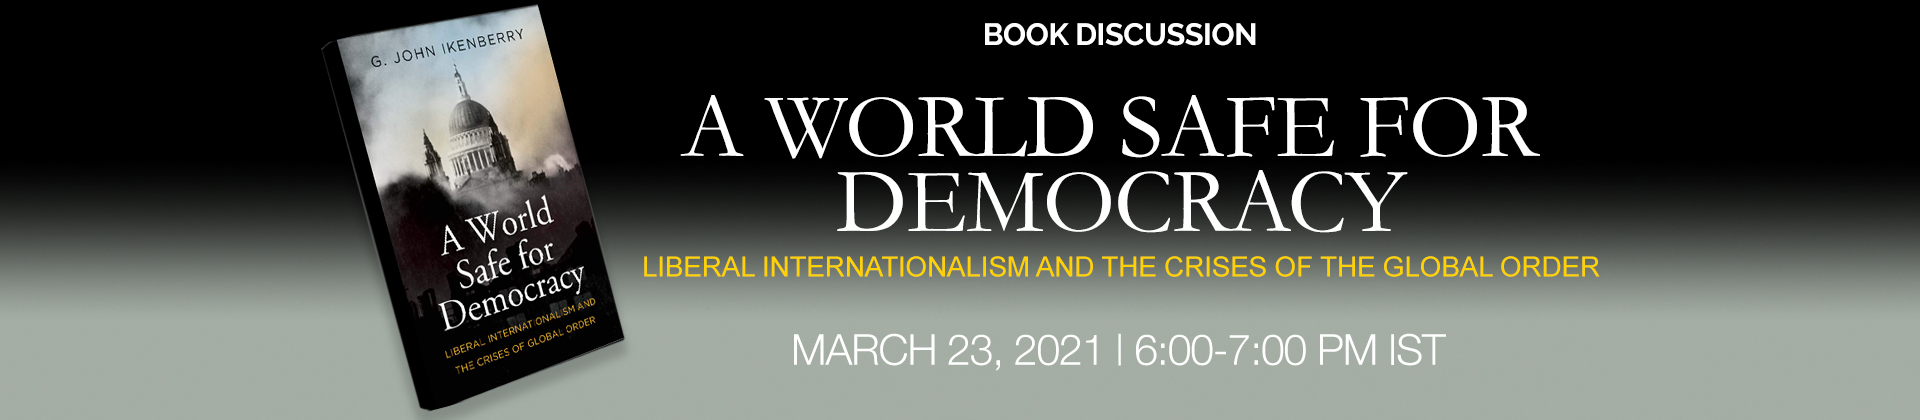 Book Discussion | A World Safe for Democracy: Liberal Internationalism and the Crises of the Global Order